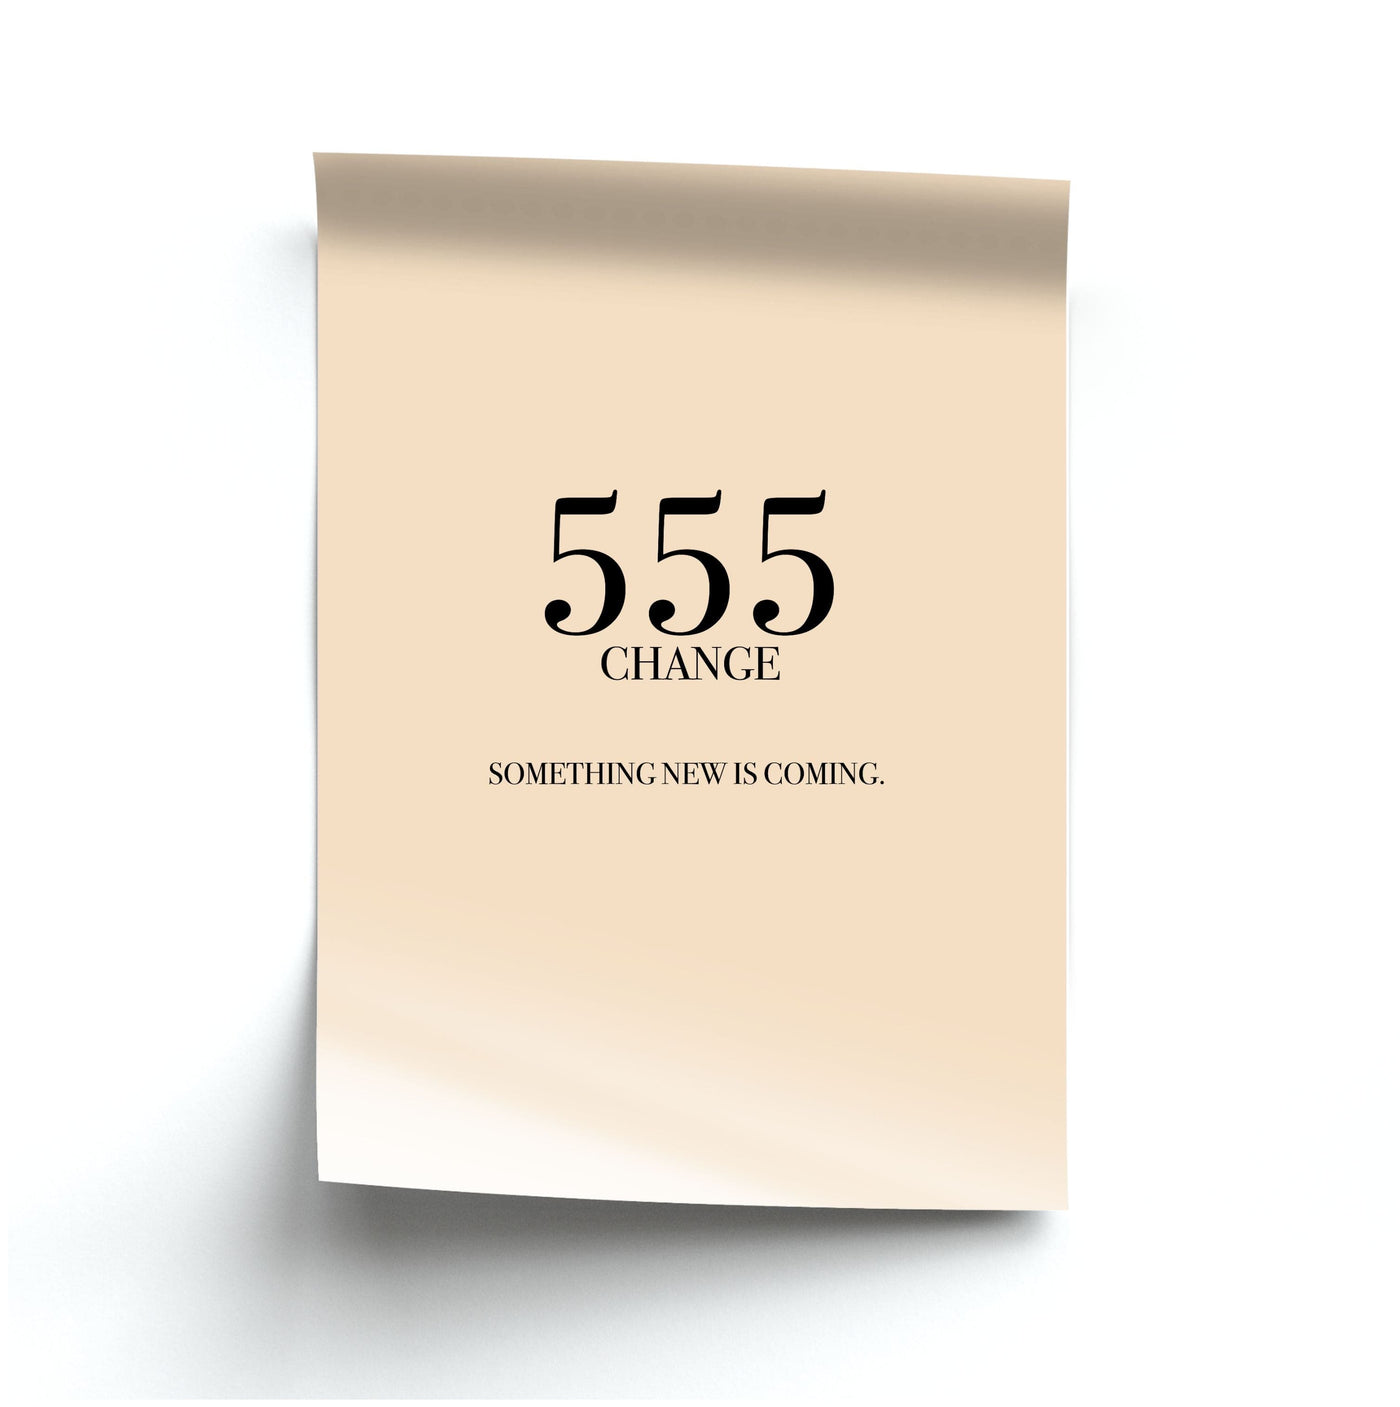 555 - Angel Numbers Poster